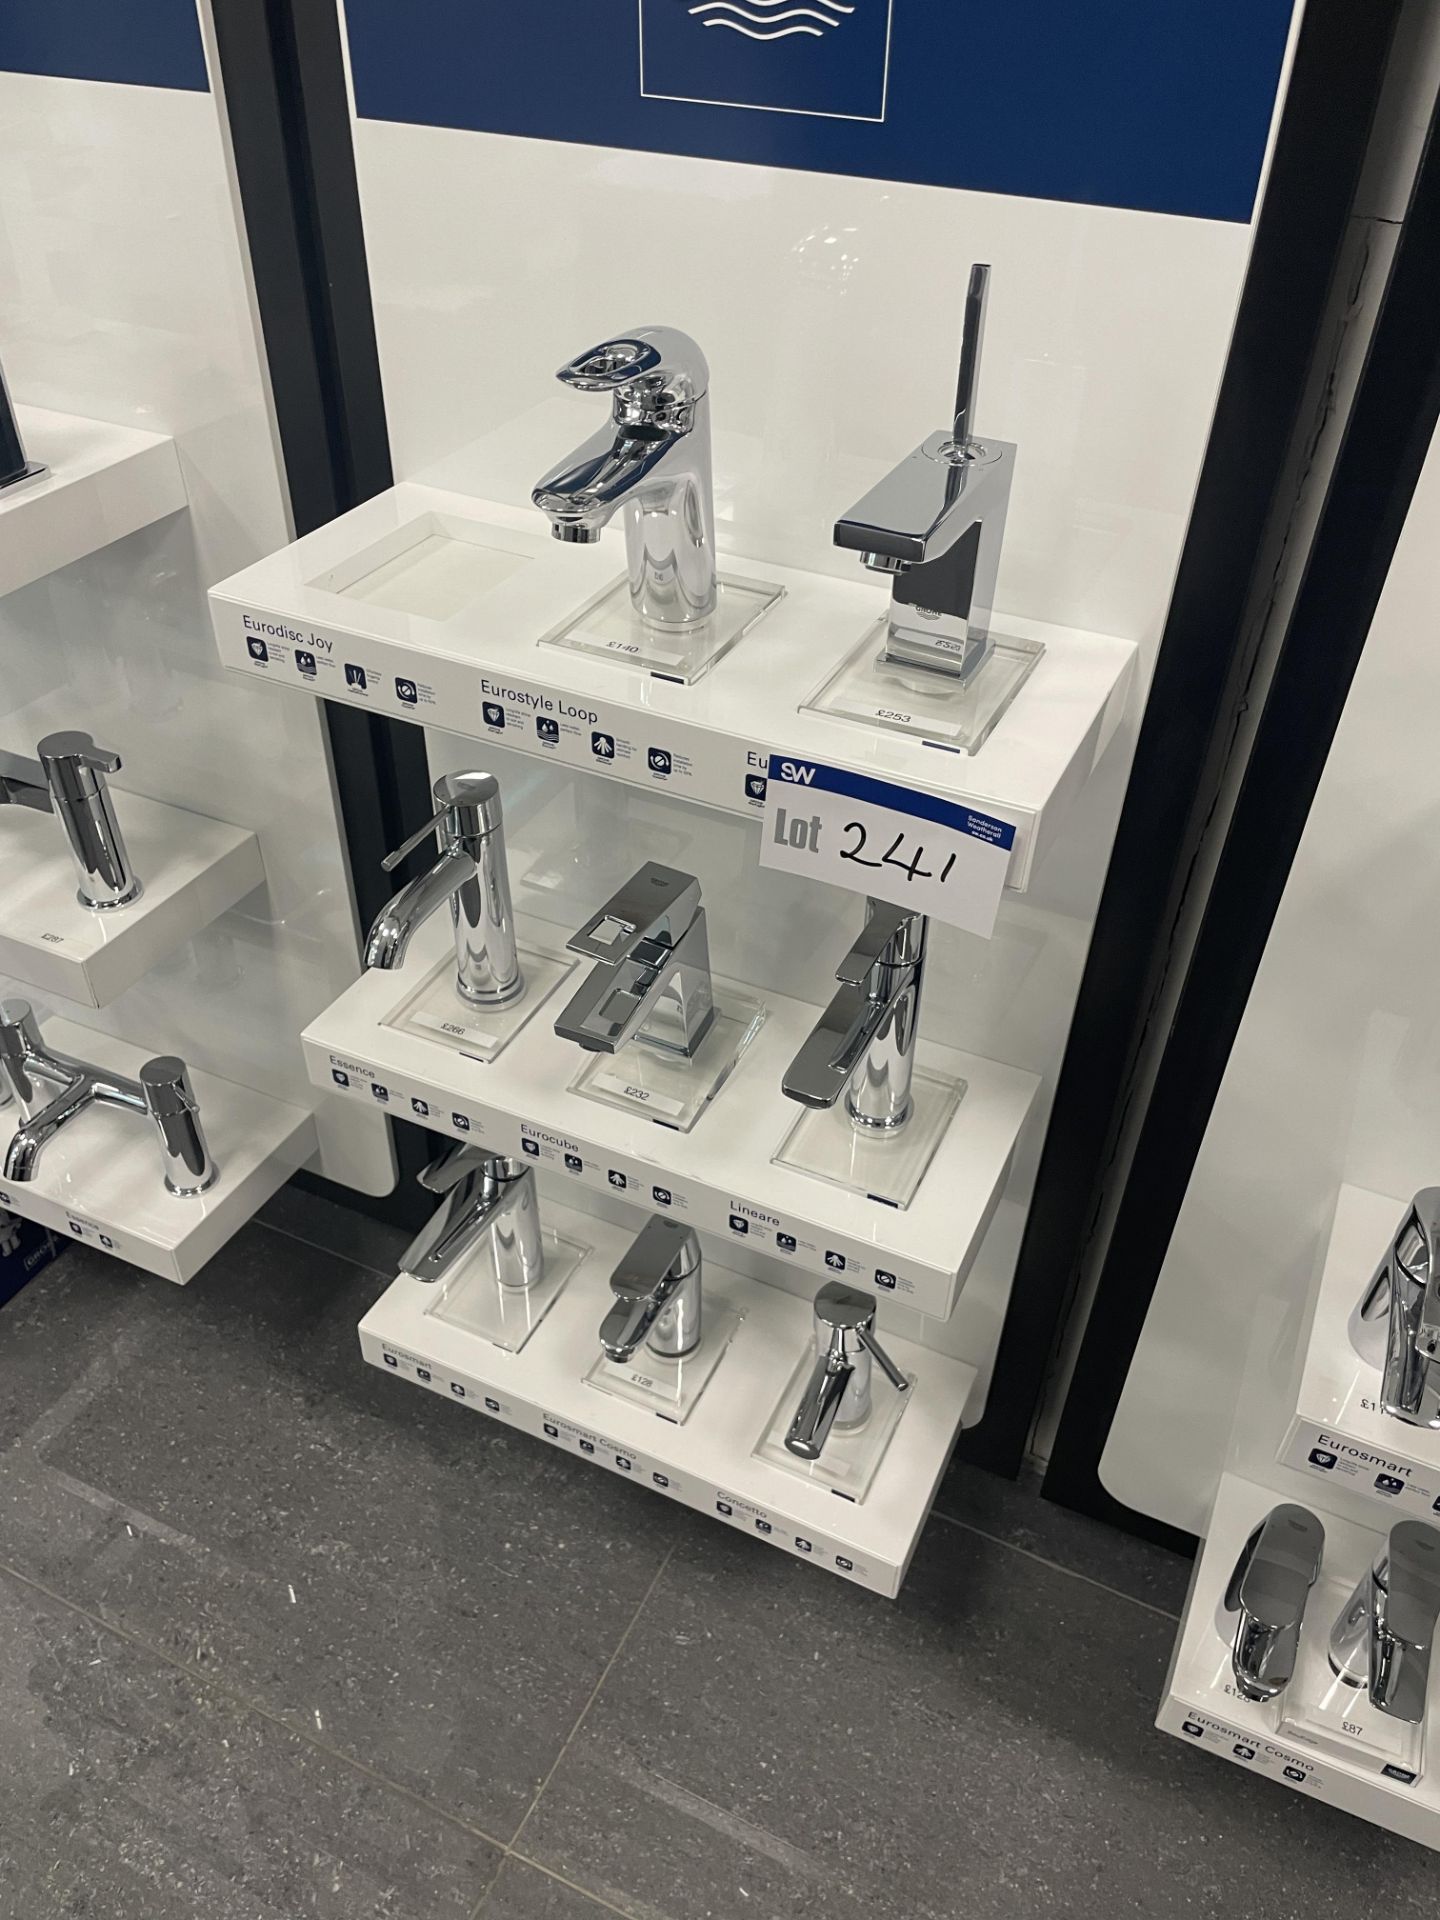 Eight Assorted Grohe Taps (understood to be a display unit and may not be complete - inspection is